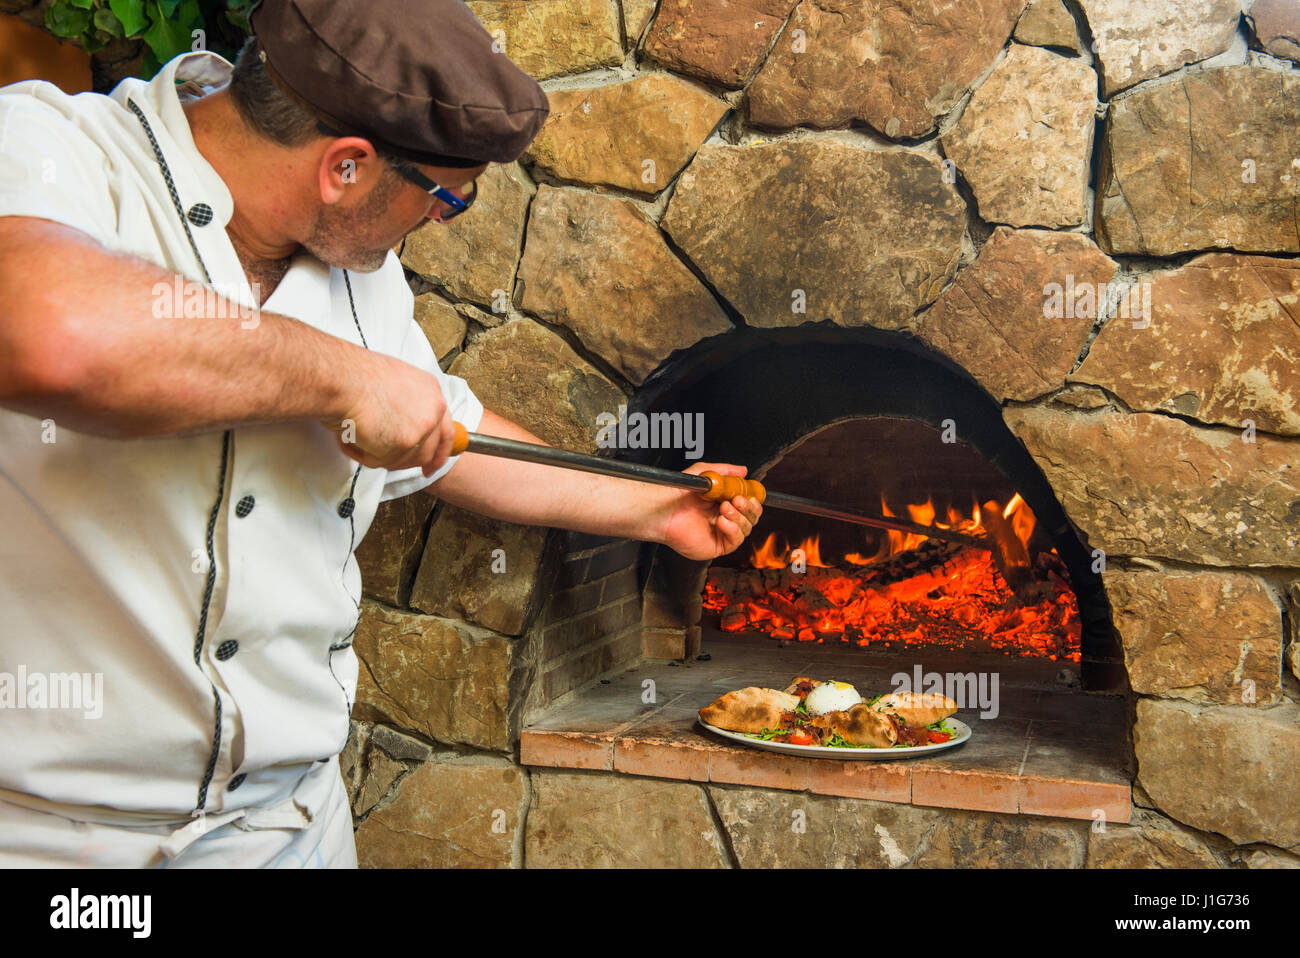 The cook sliding out pizza from a oven. Stock Photo